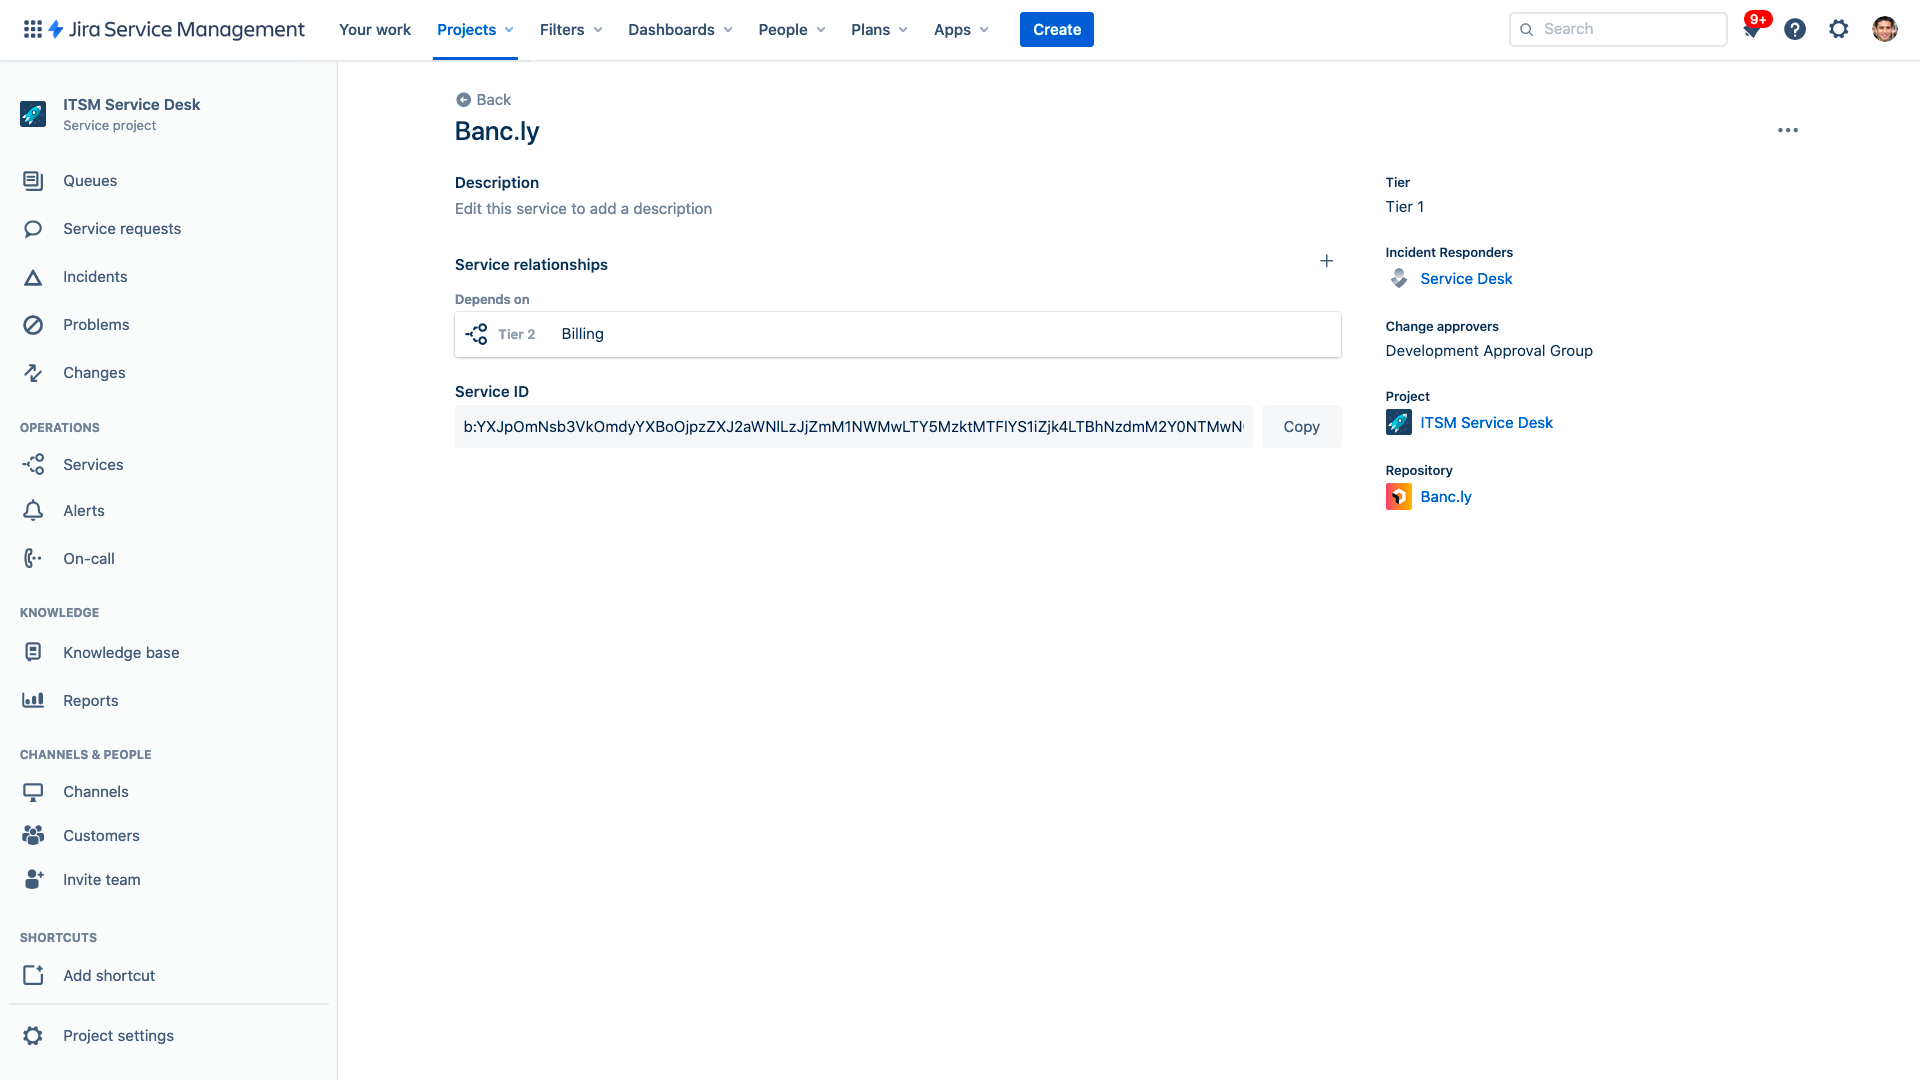 Services-Registry in Jira Service Management